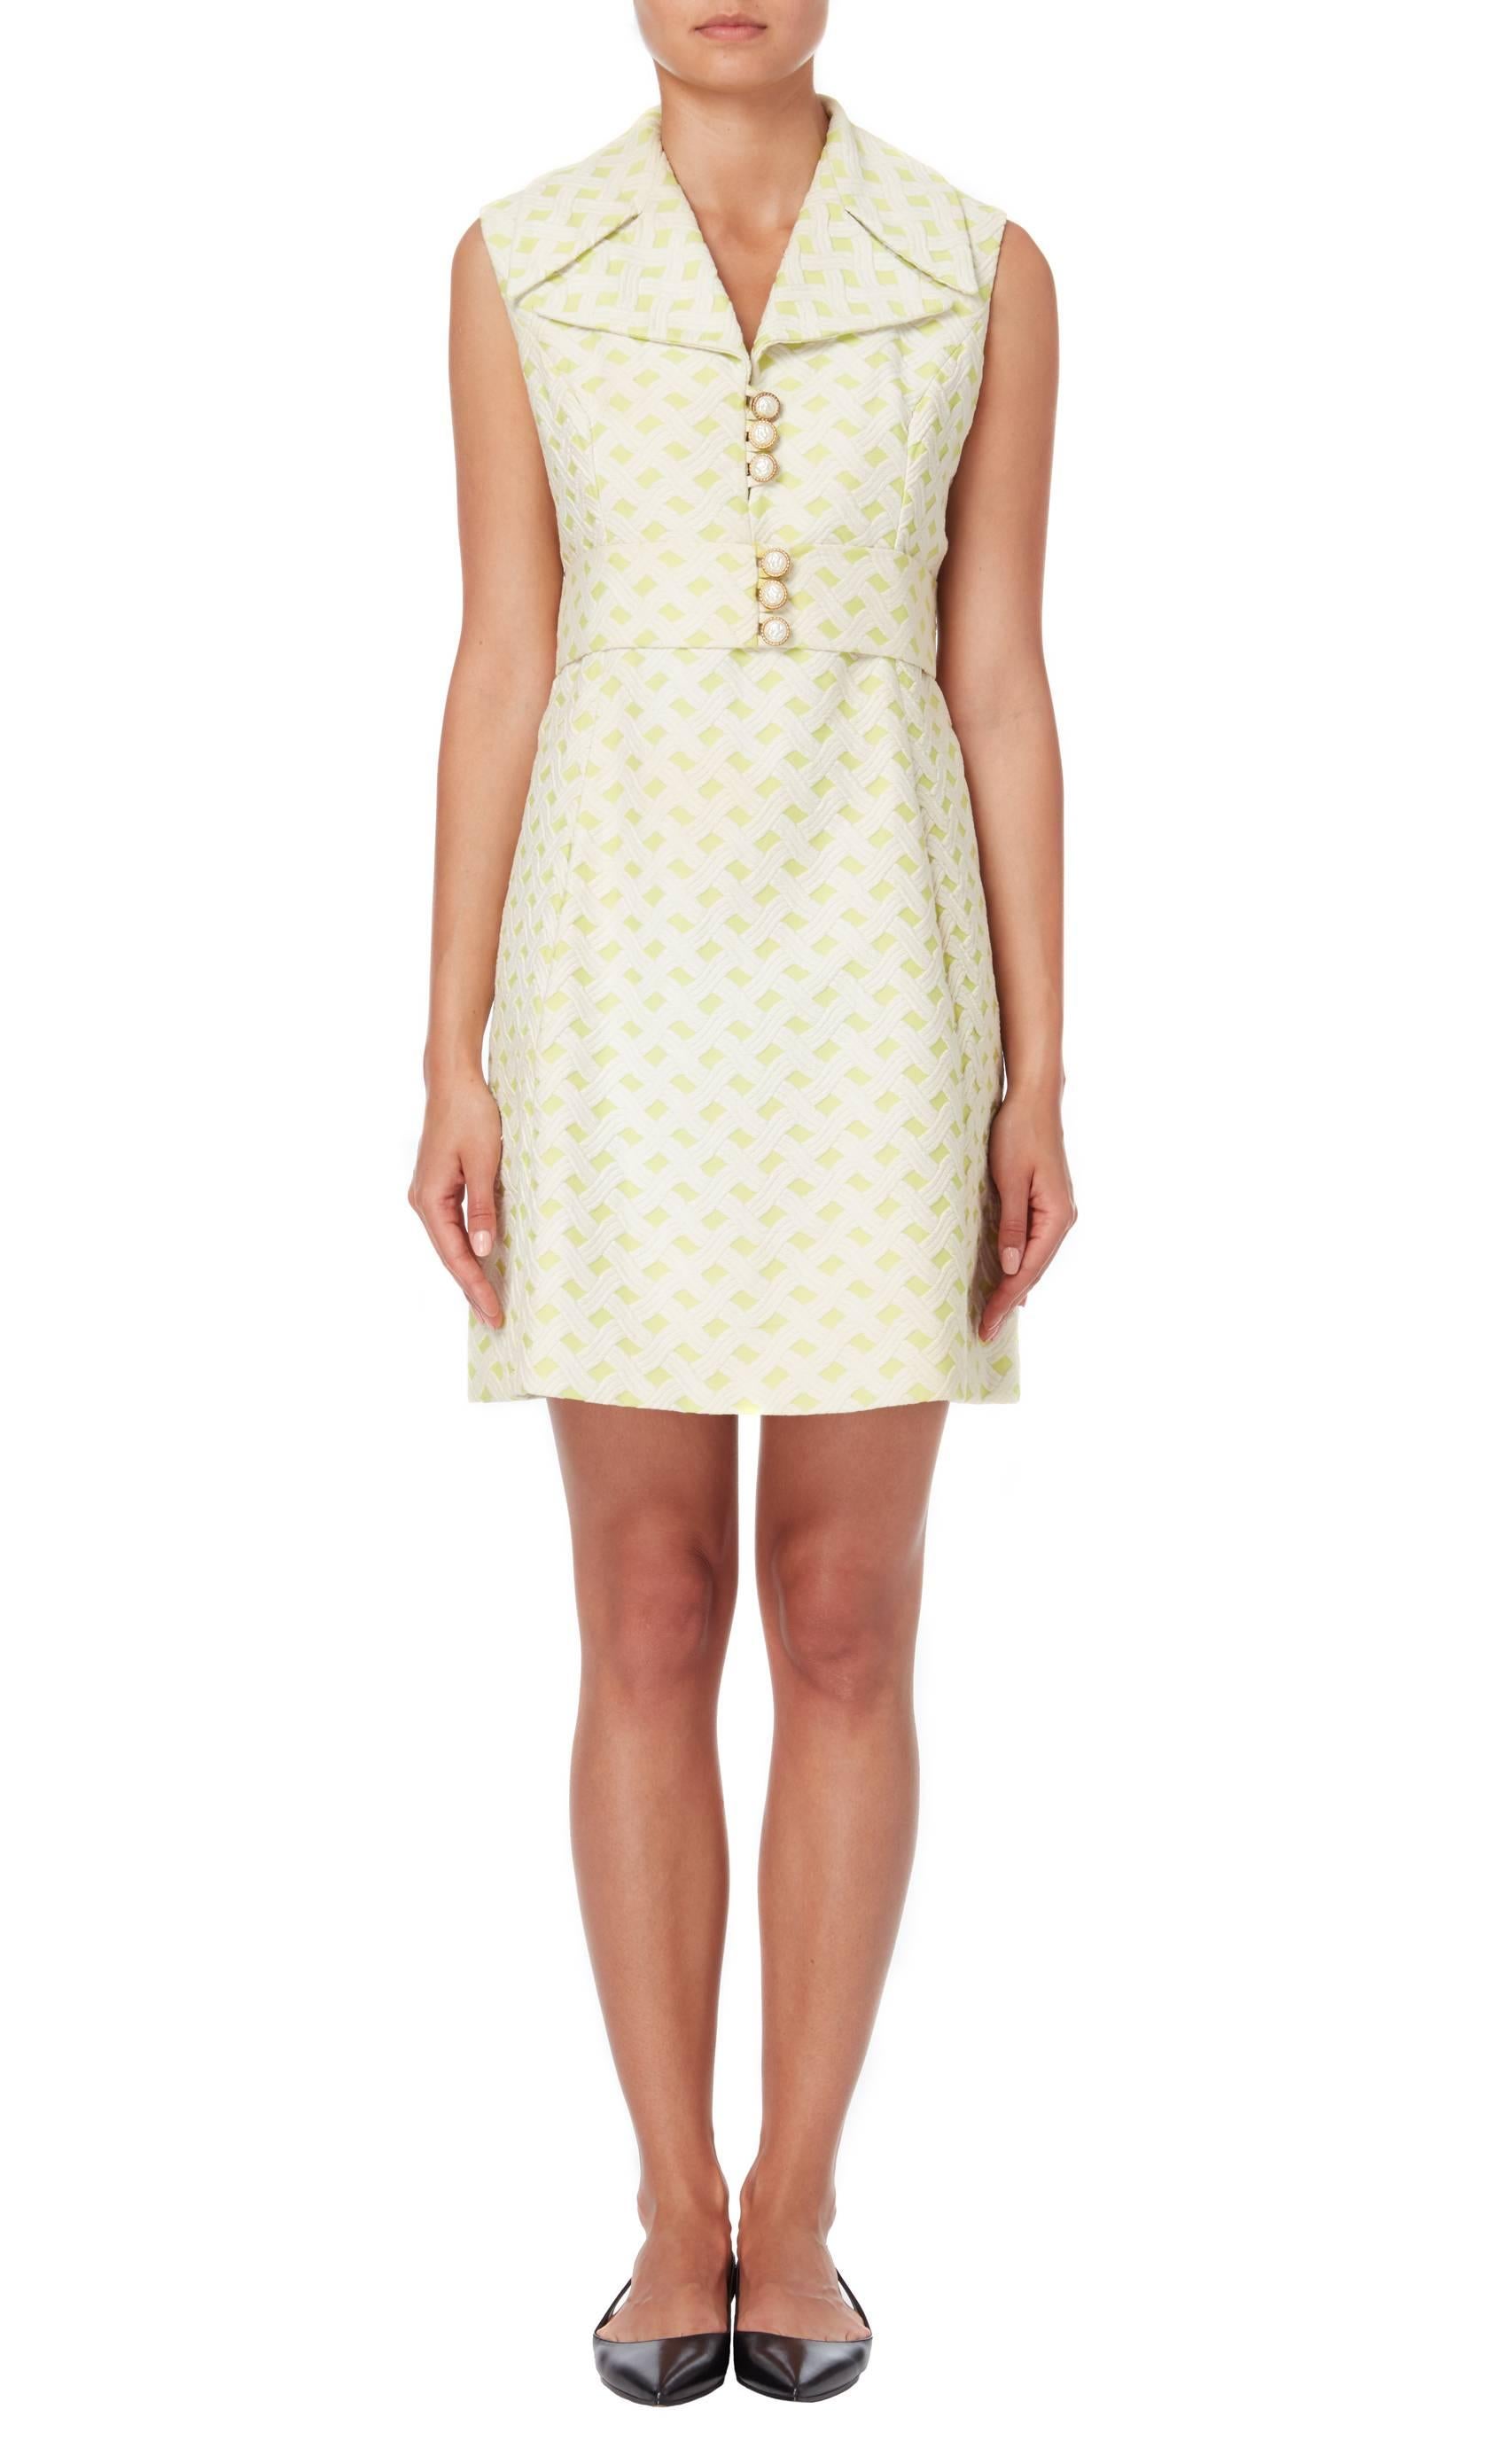 Constructed in a cotton and synthetic mixed fabric, the material of the dress is made in a jacquard hatch cross pattern of pale green and white. Large pearl and gold buttons adorn the bodice and waist belt, with large oversized collar and lapels.